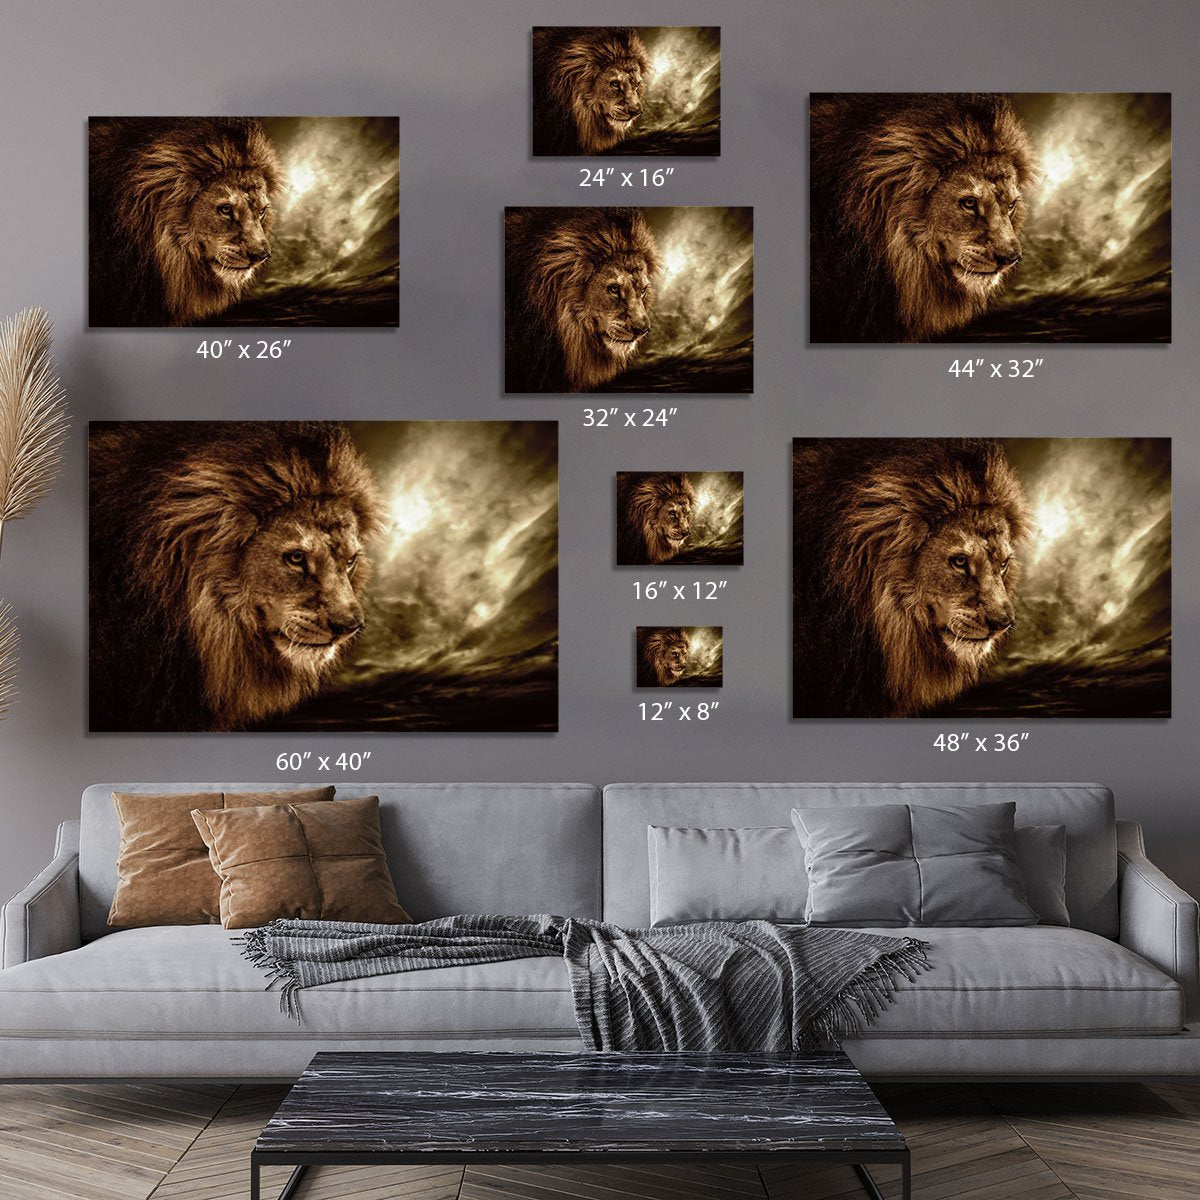 Lion against stormy sky Canvas Print or Poster